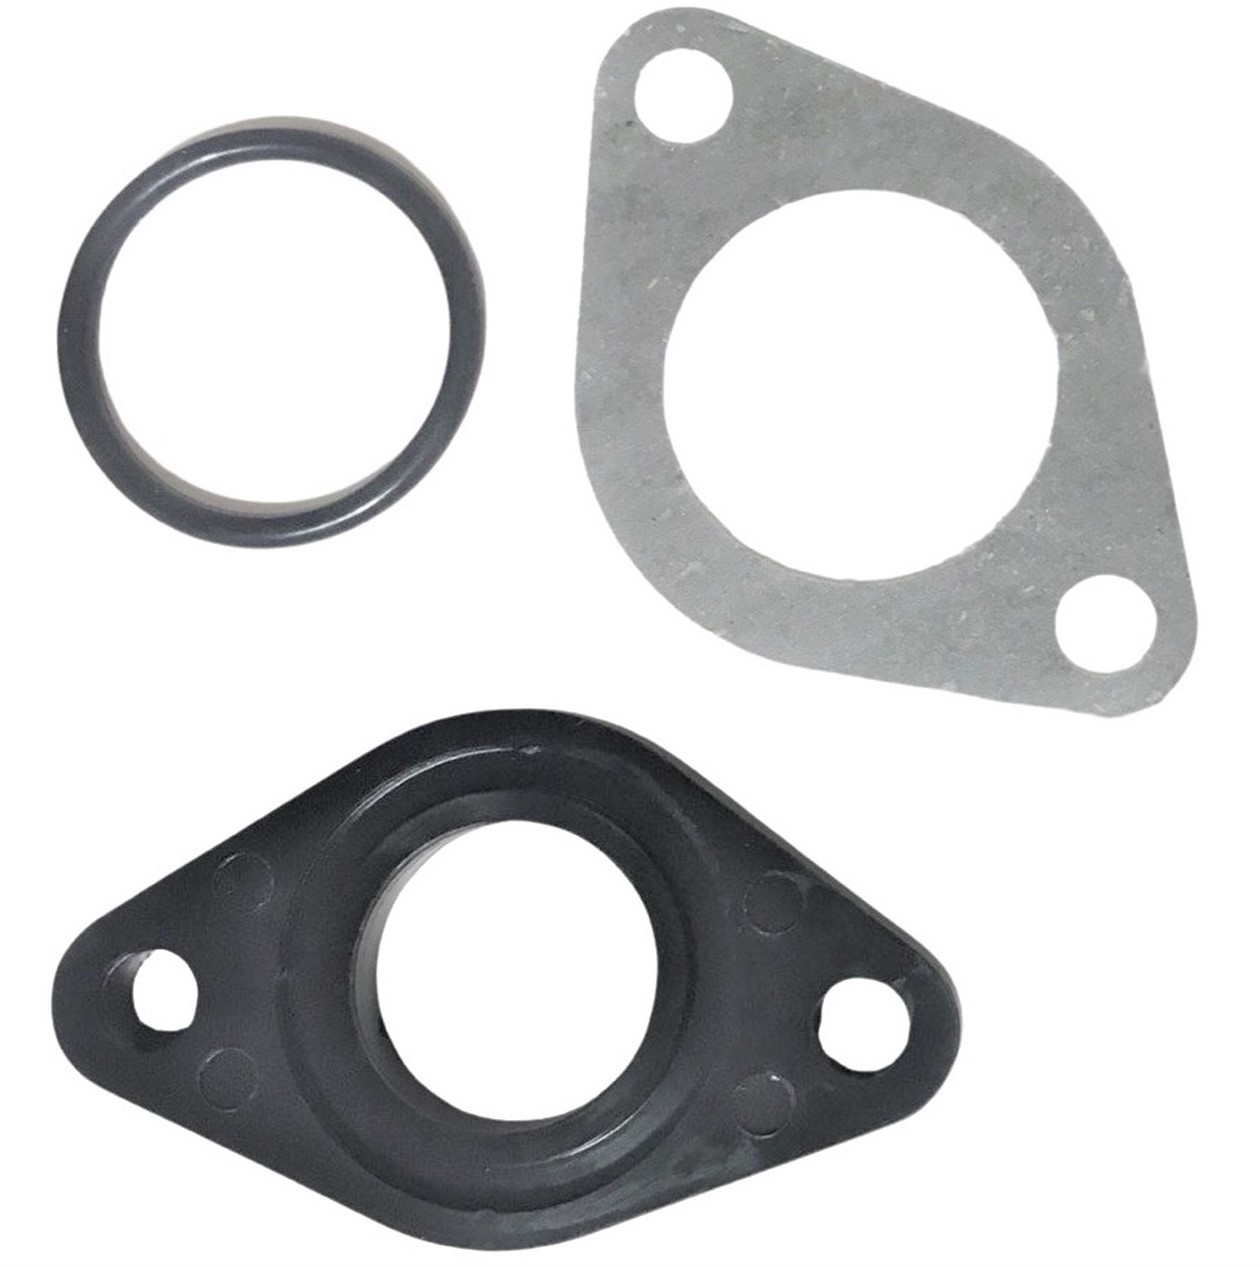 Insulator with O-Ring & Gasket for PZ Carbs. Bolts c/c=48mm Hole ID=20mm - Click Image to Close